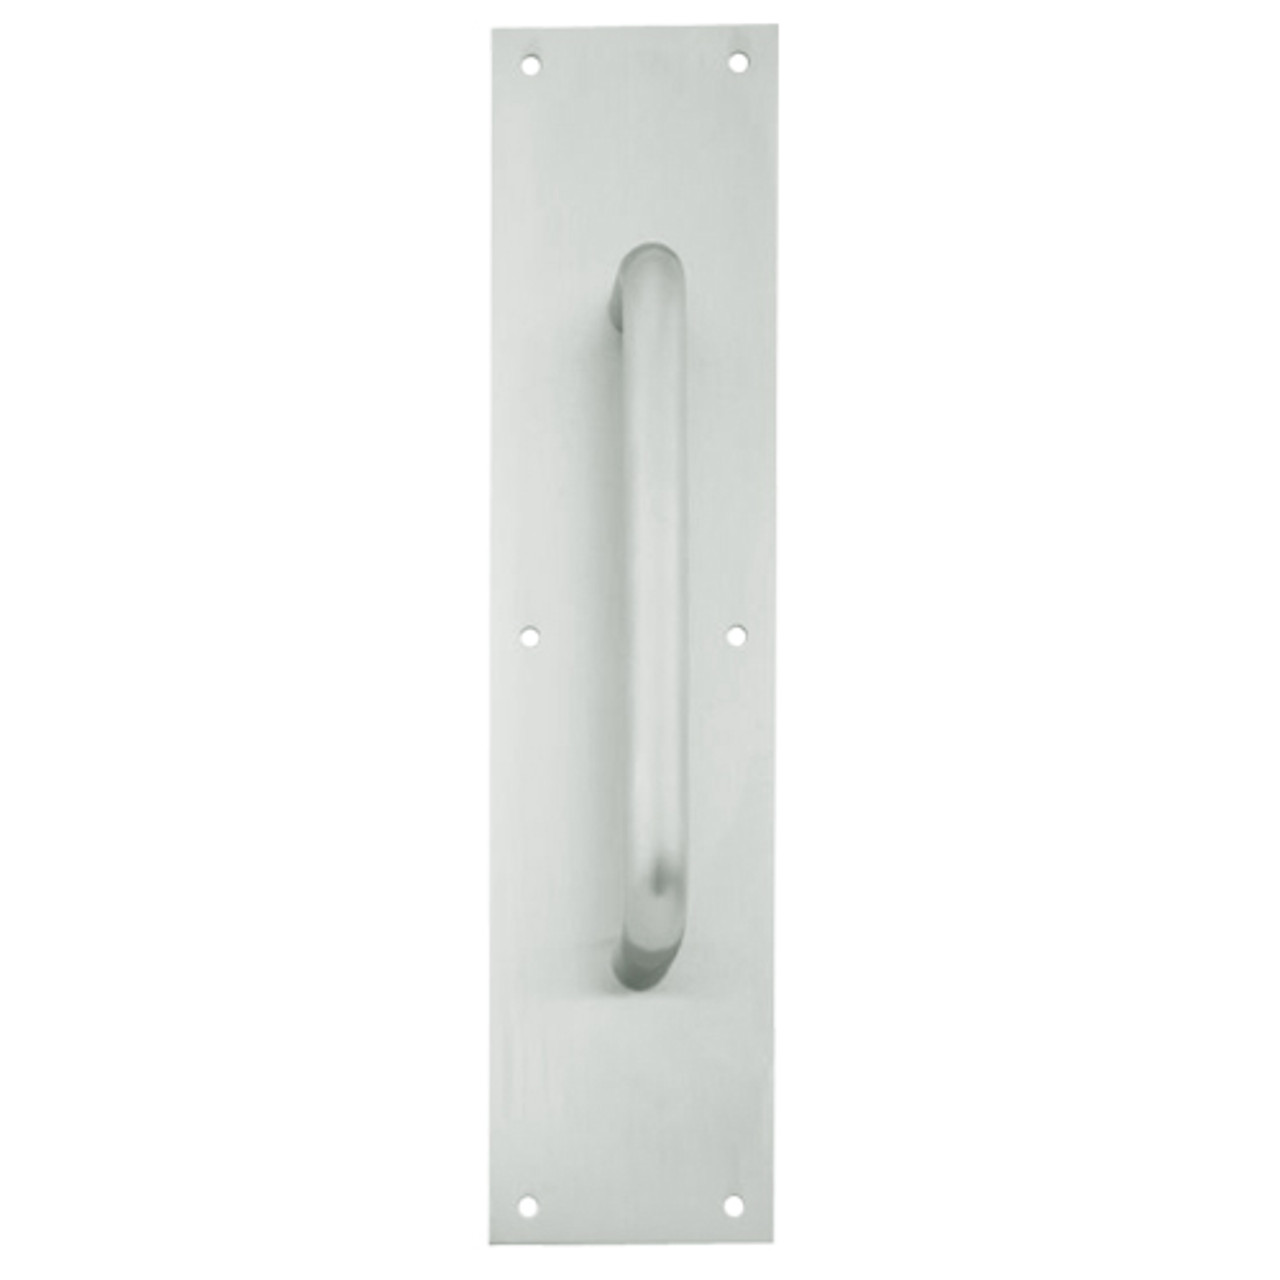 8302-6-US15-6x16 IVES Architectural Door Trim 6x16 Inch Pull Plate in Satin Nickel